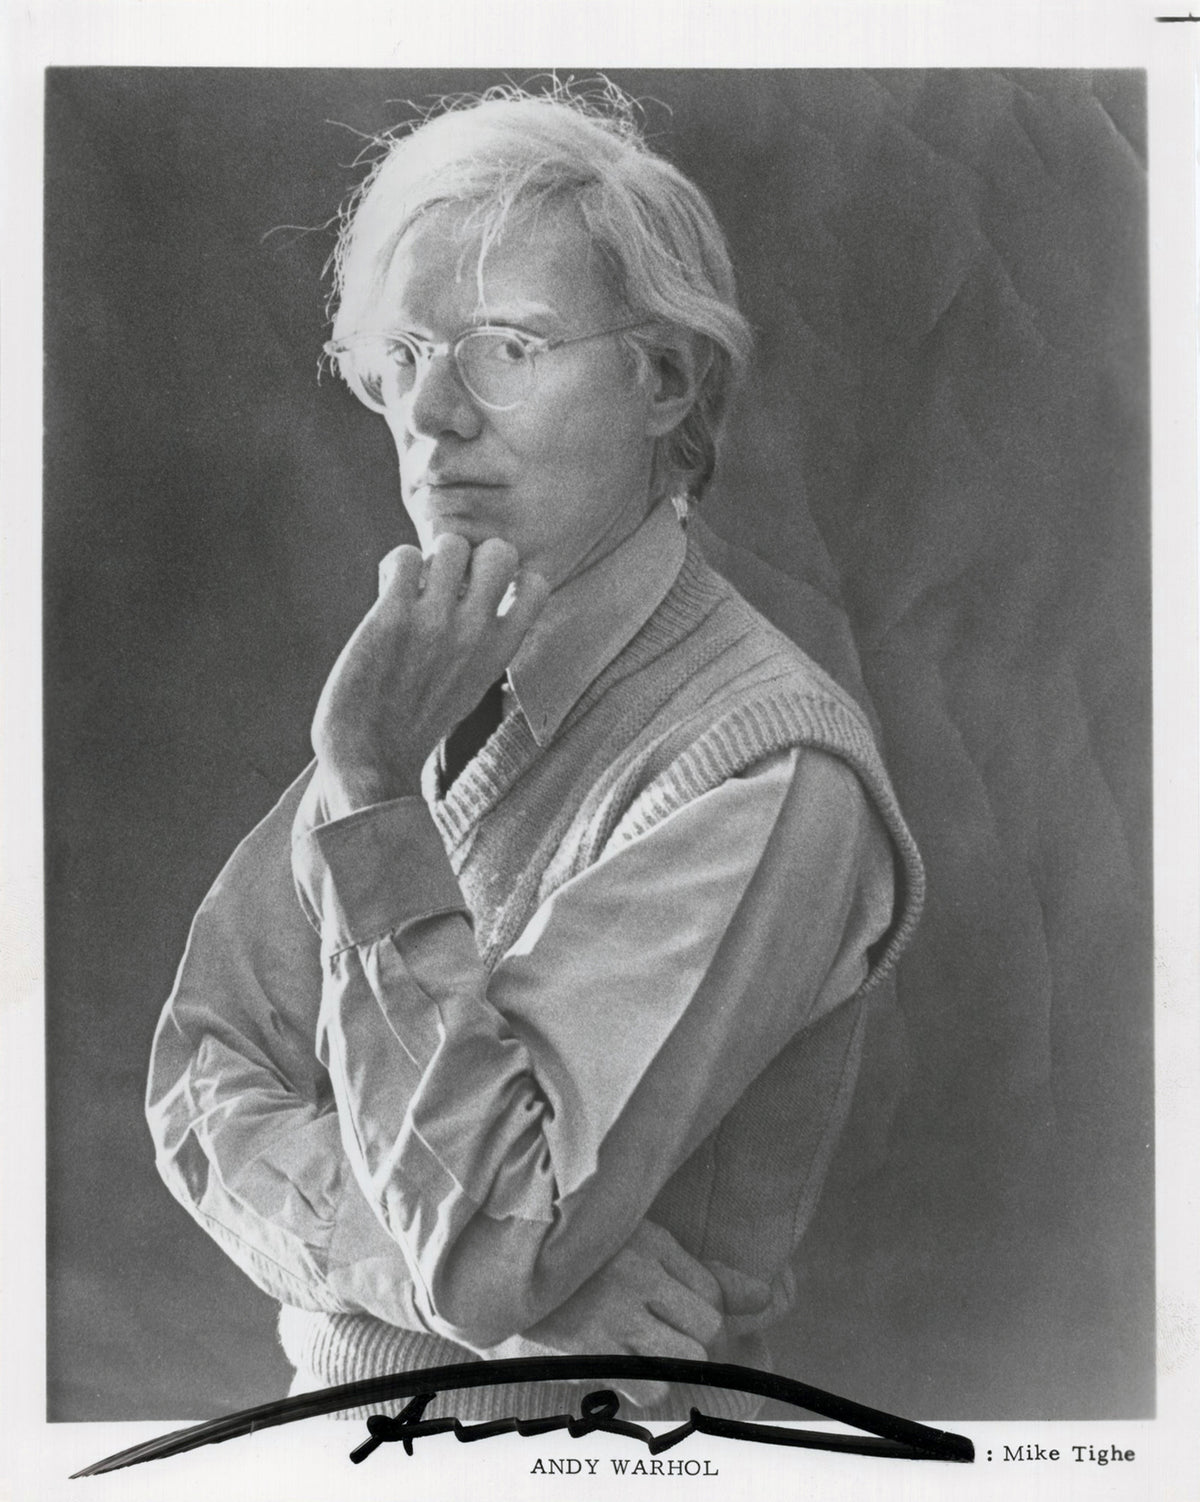 Andy Warhol - Signed 8x10 Promotional Photograph by Mike Tighe